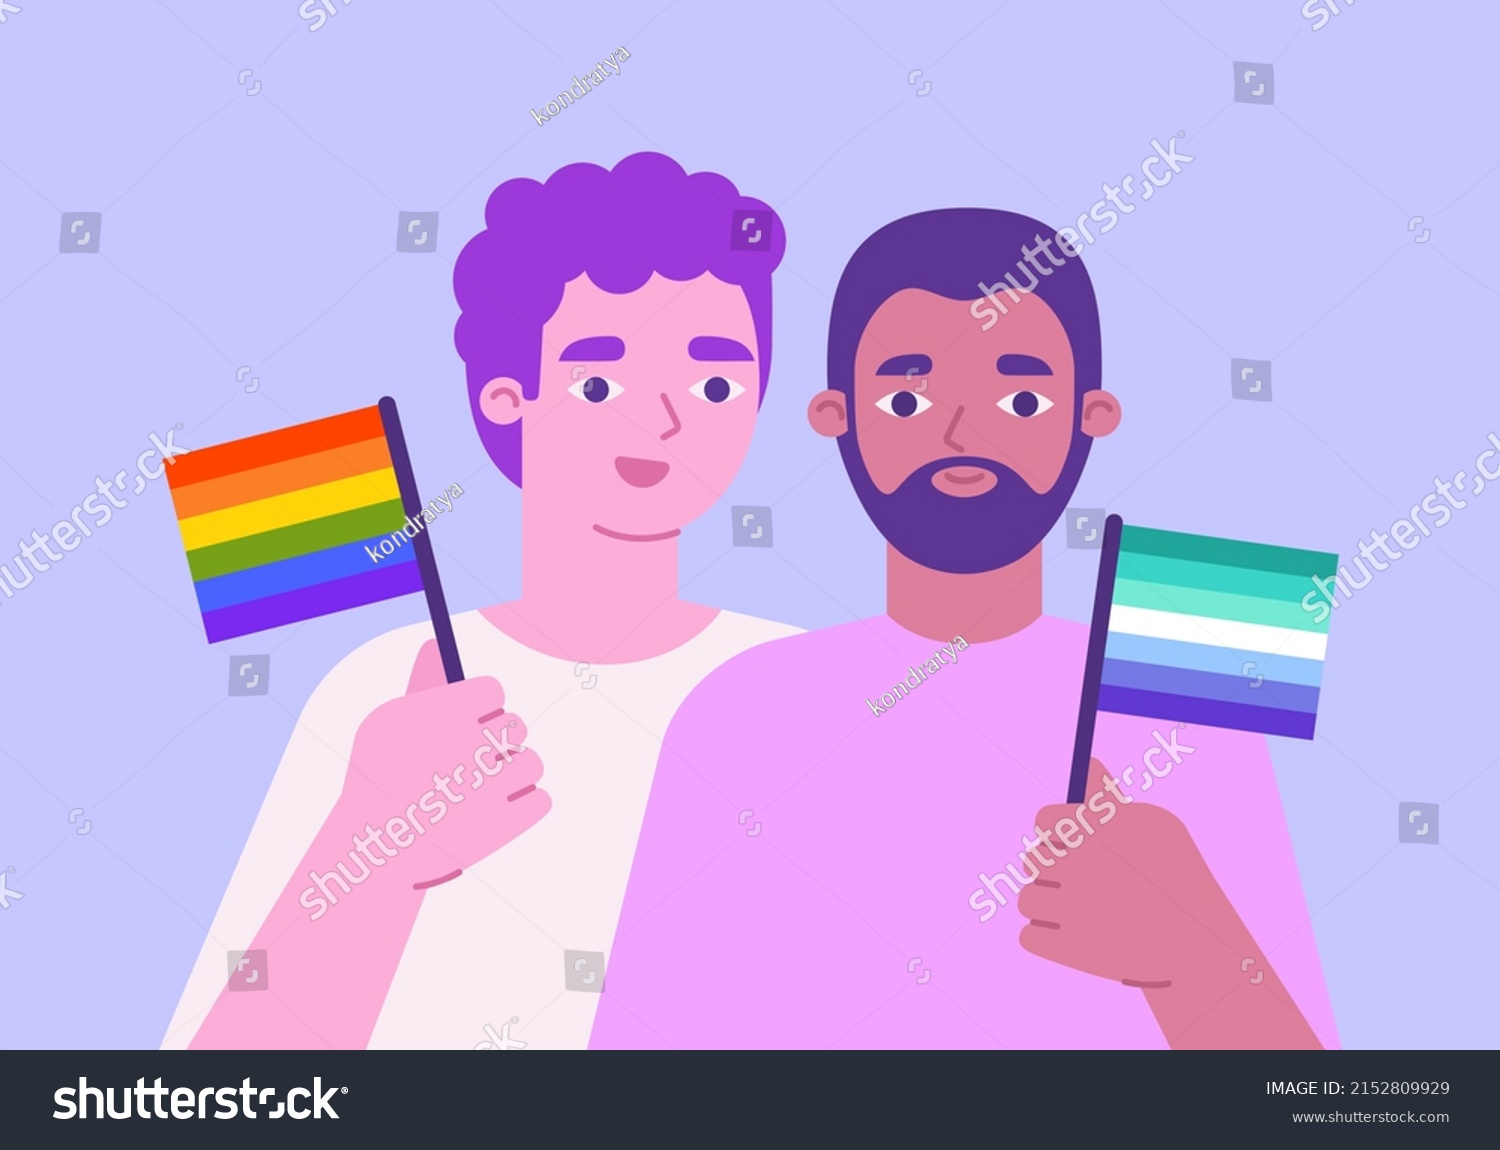 Caucasian Gay Male Couple Pride Month Stock Vector Royalty Free 2152809929 Shutterstock 2333